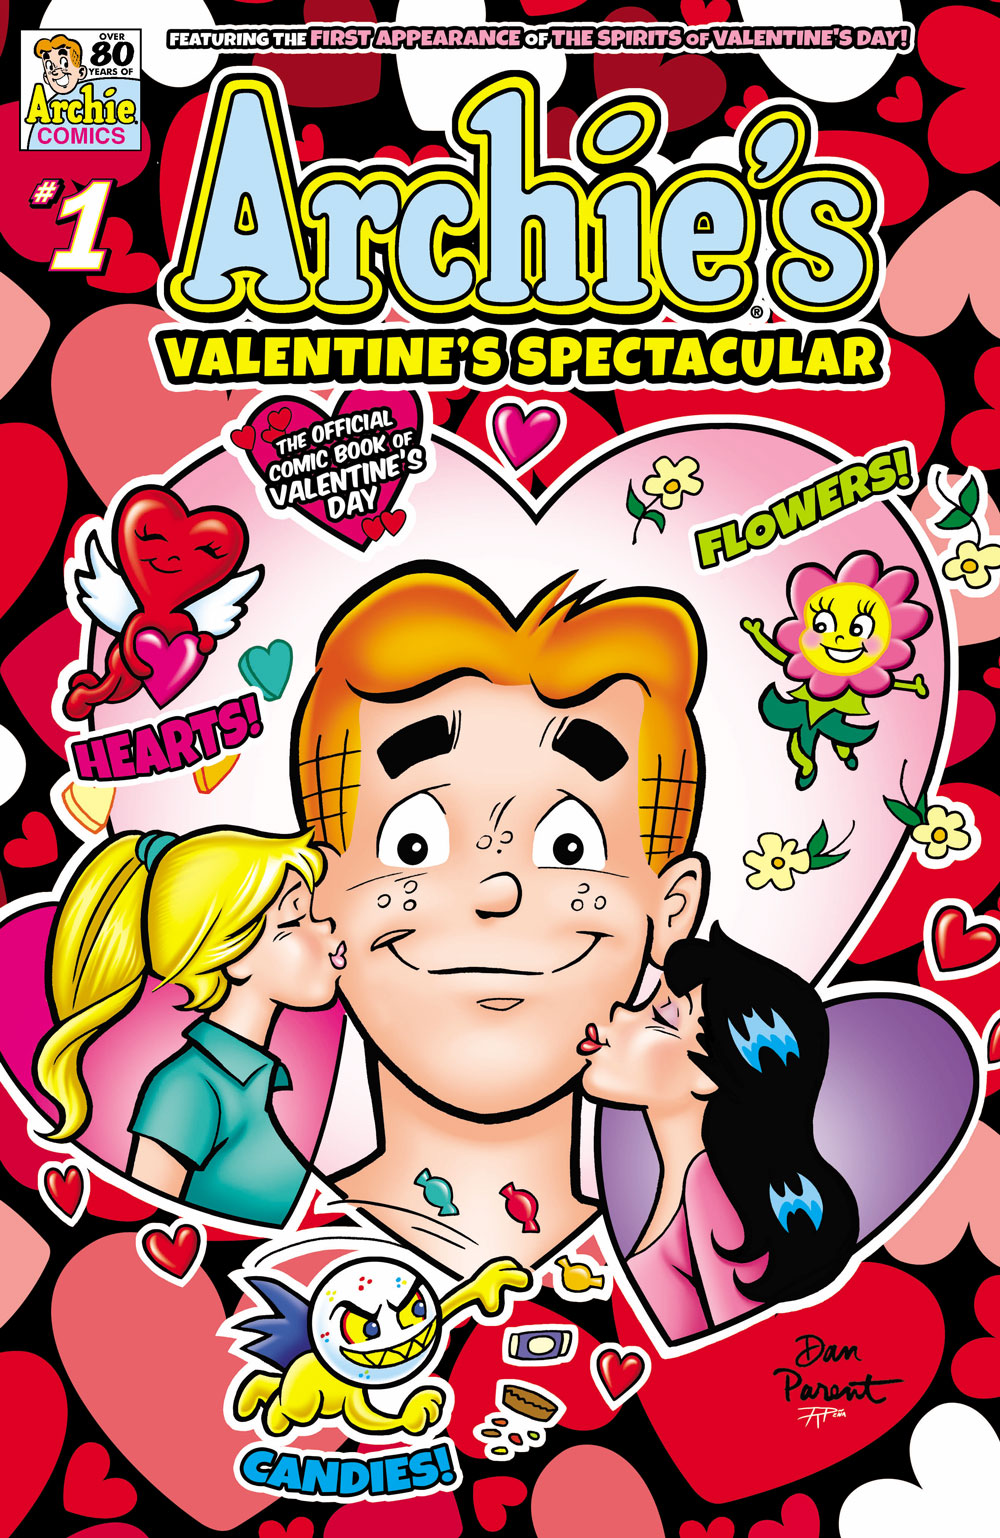 Variant cover of ARCHIE'S VALENTINE'S SPECTACULAR #1. Betty and Veronica kiss Archie on the cheek, surrounded by the Spirits of Valentine's Day: Hearts, Flowers, and Candy.